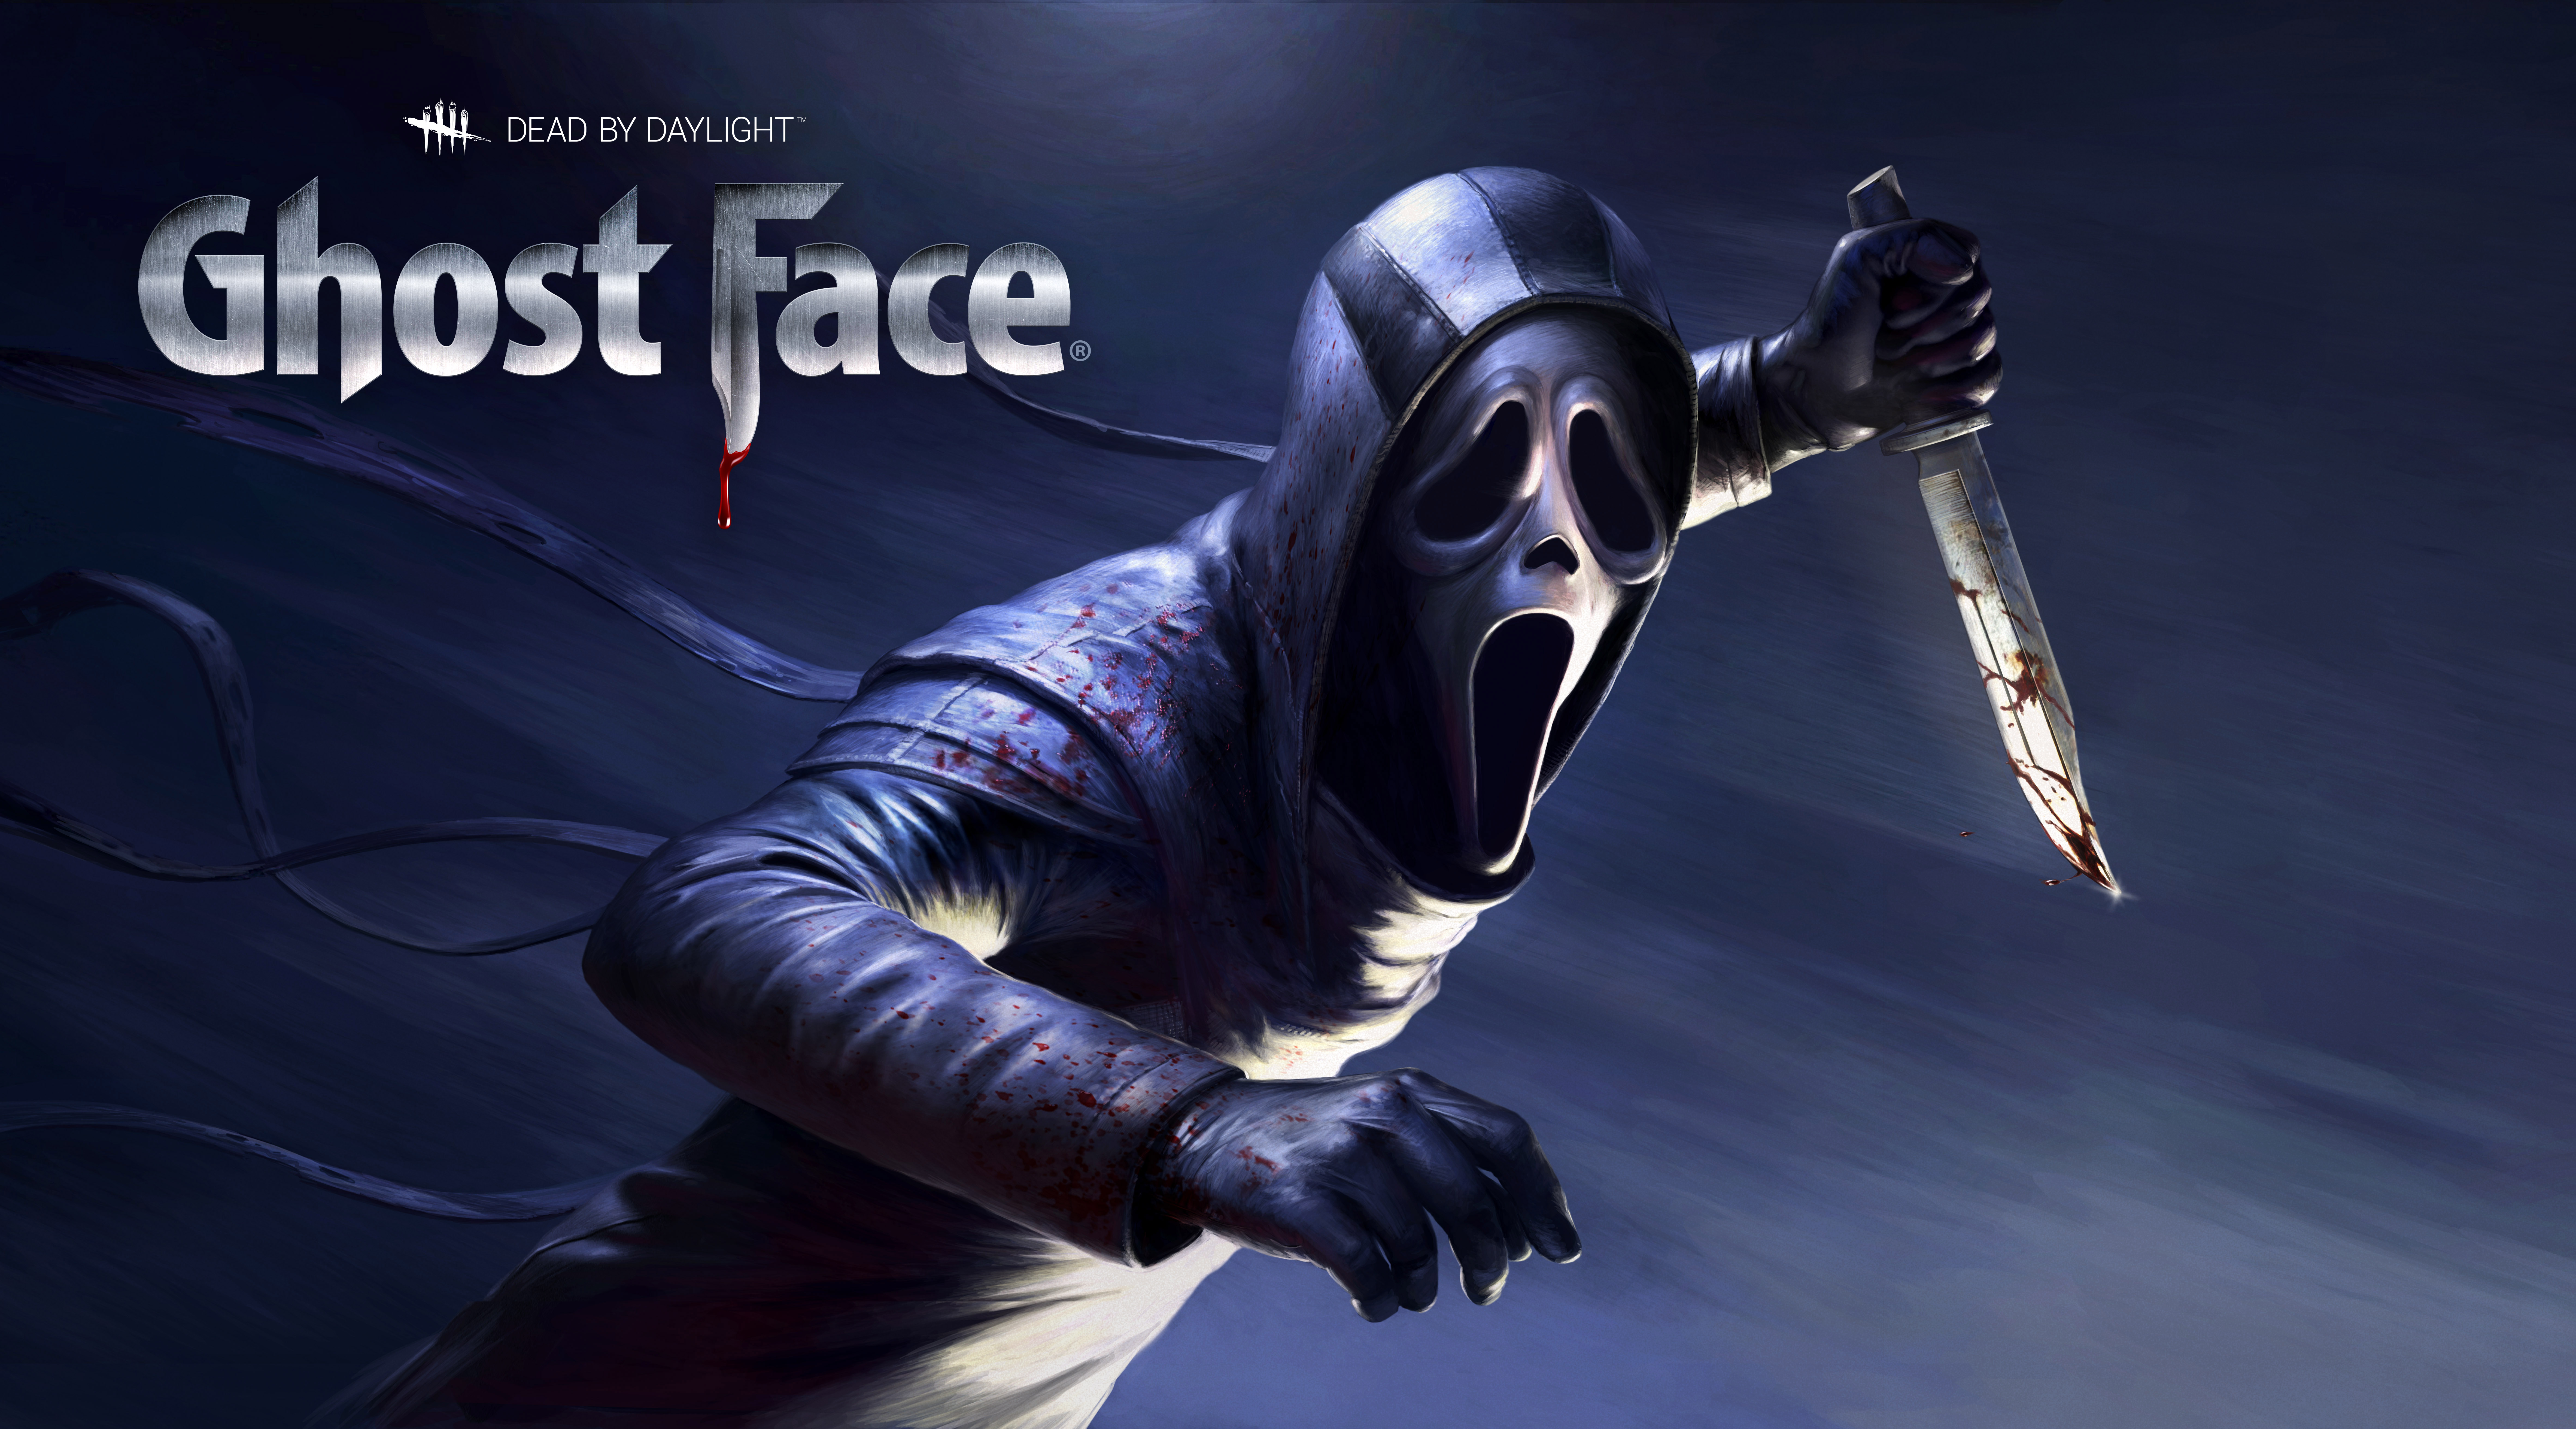 Dead By Daylight Ghostface DLC, HD Games, 4k Wallpapers, Images